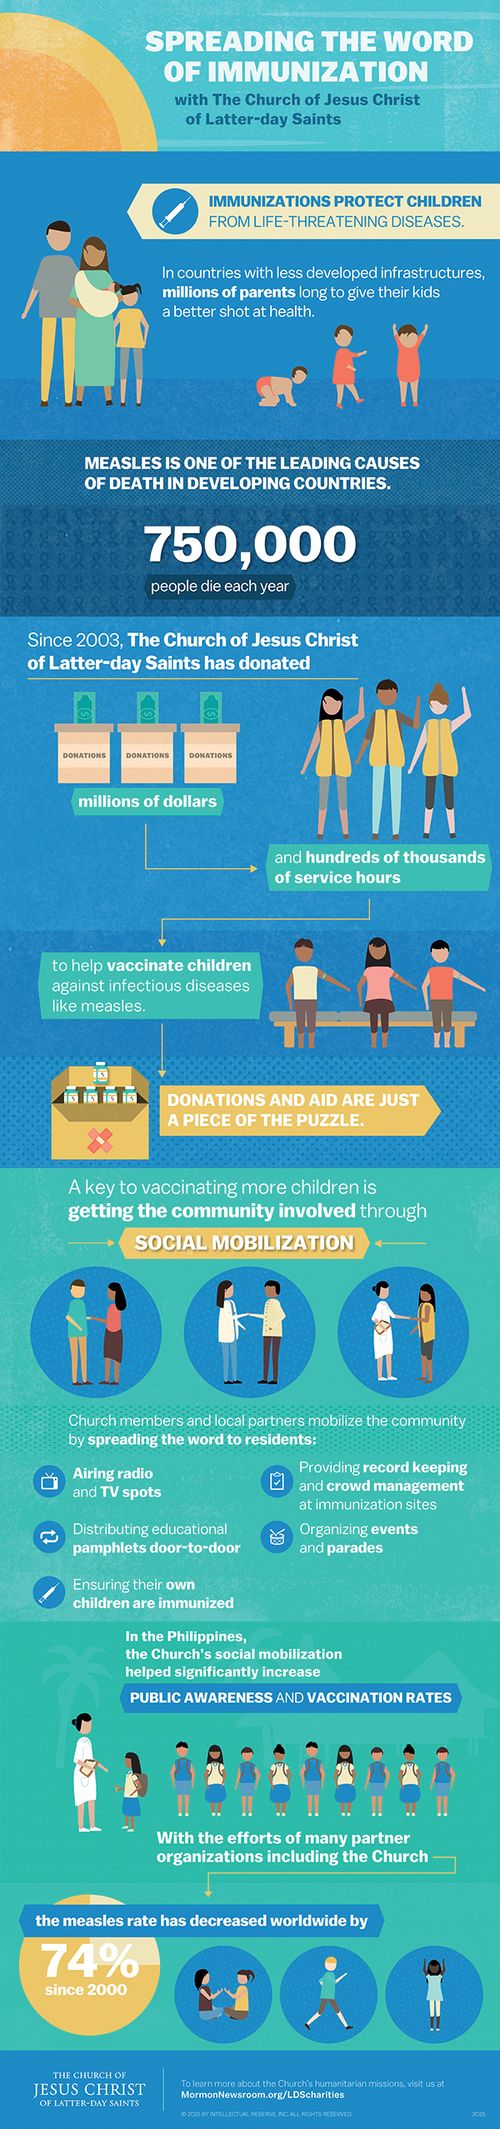 An infographic outlining the importance of immunizations and the LDS Church's efforts to provide immunizations globally. Learn more at mormonnewsroom.org.